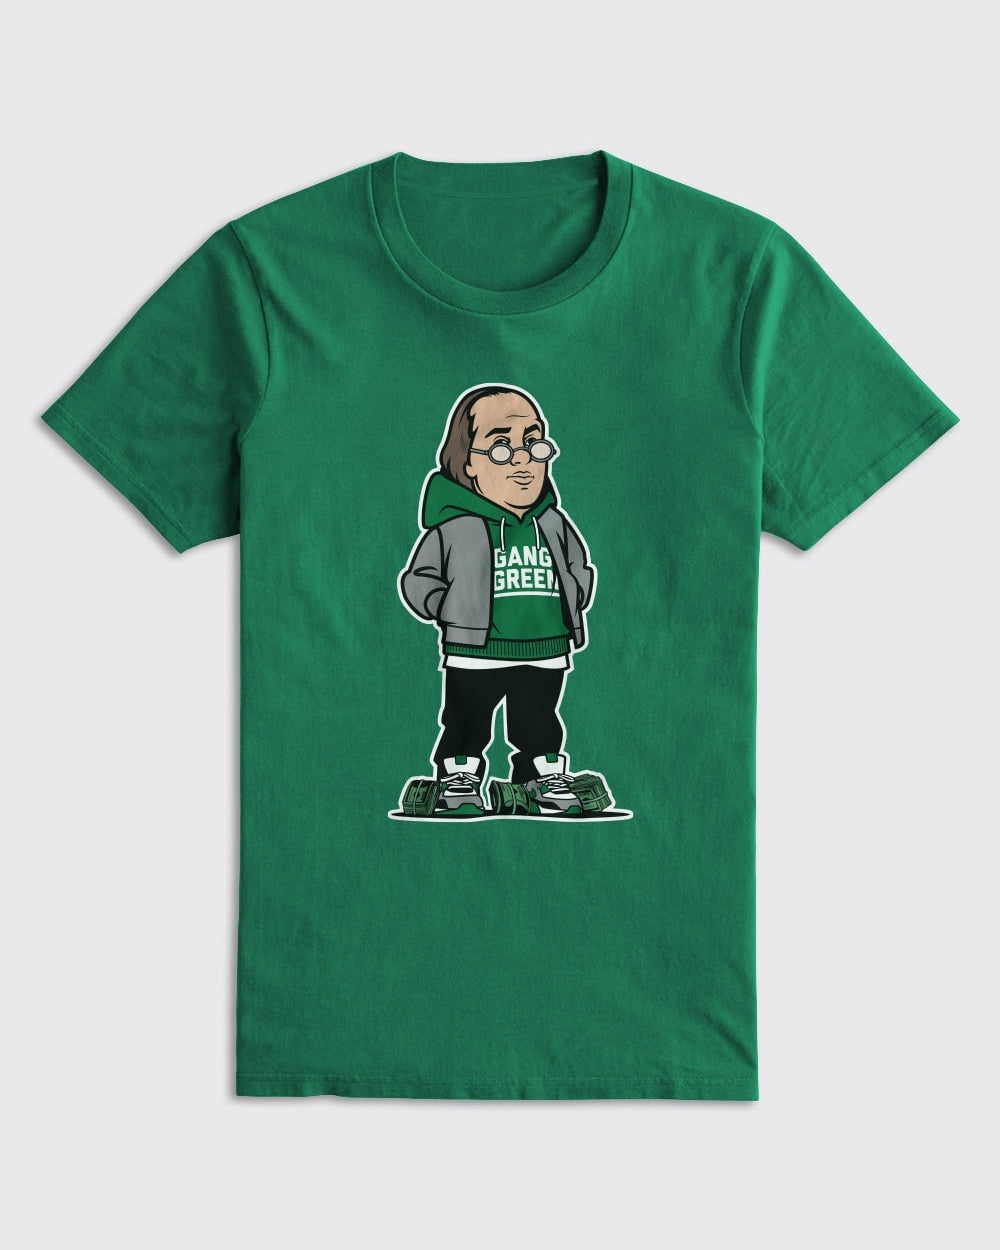 Ben Franklin Eagles Shirt - Eagles, T-Shirts - Philly Sports Shirts